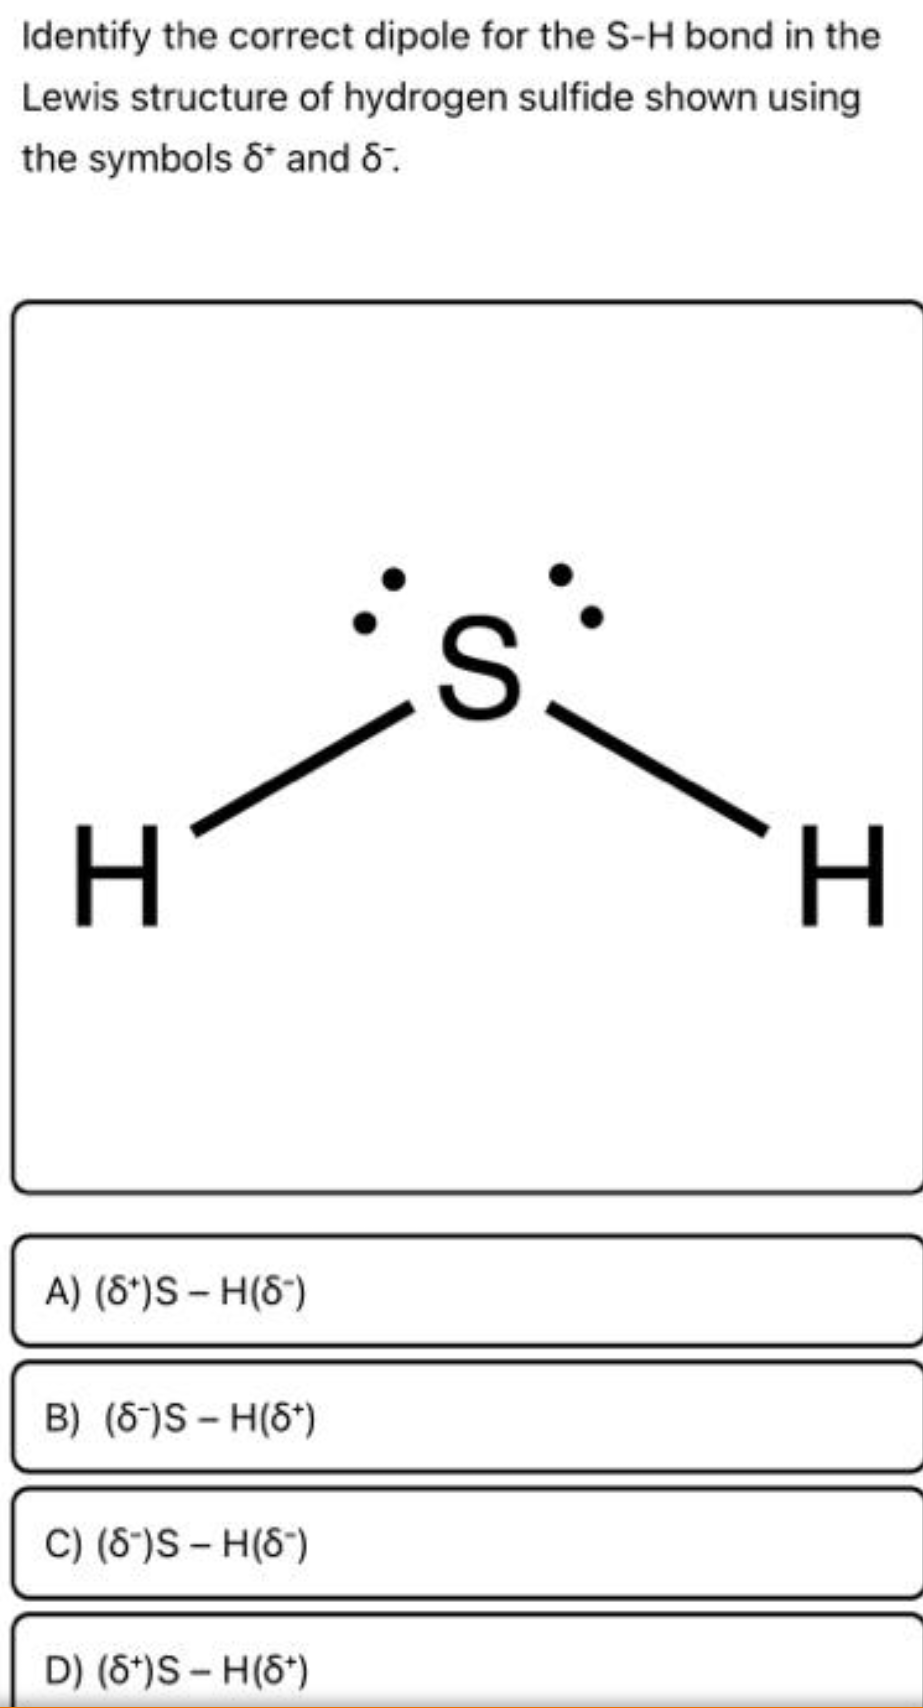 Identify the correct dipole for the S-H bond in the
Lewis structure of hydrogen sulfide shown using
the symbols 6* and 8.
H
A) (8*)S – H(8")
B) (6-)S – H(6*)
C) (8*)S - H(8")
D) (6*)S- H(6*)
